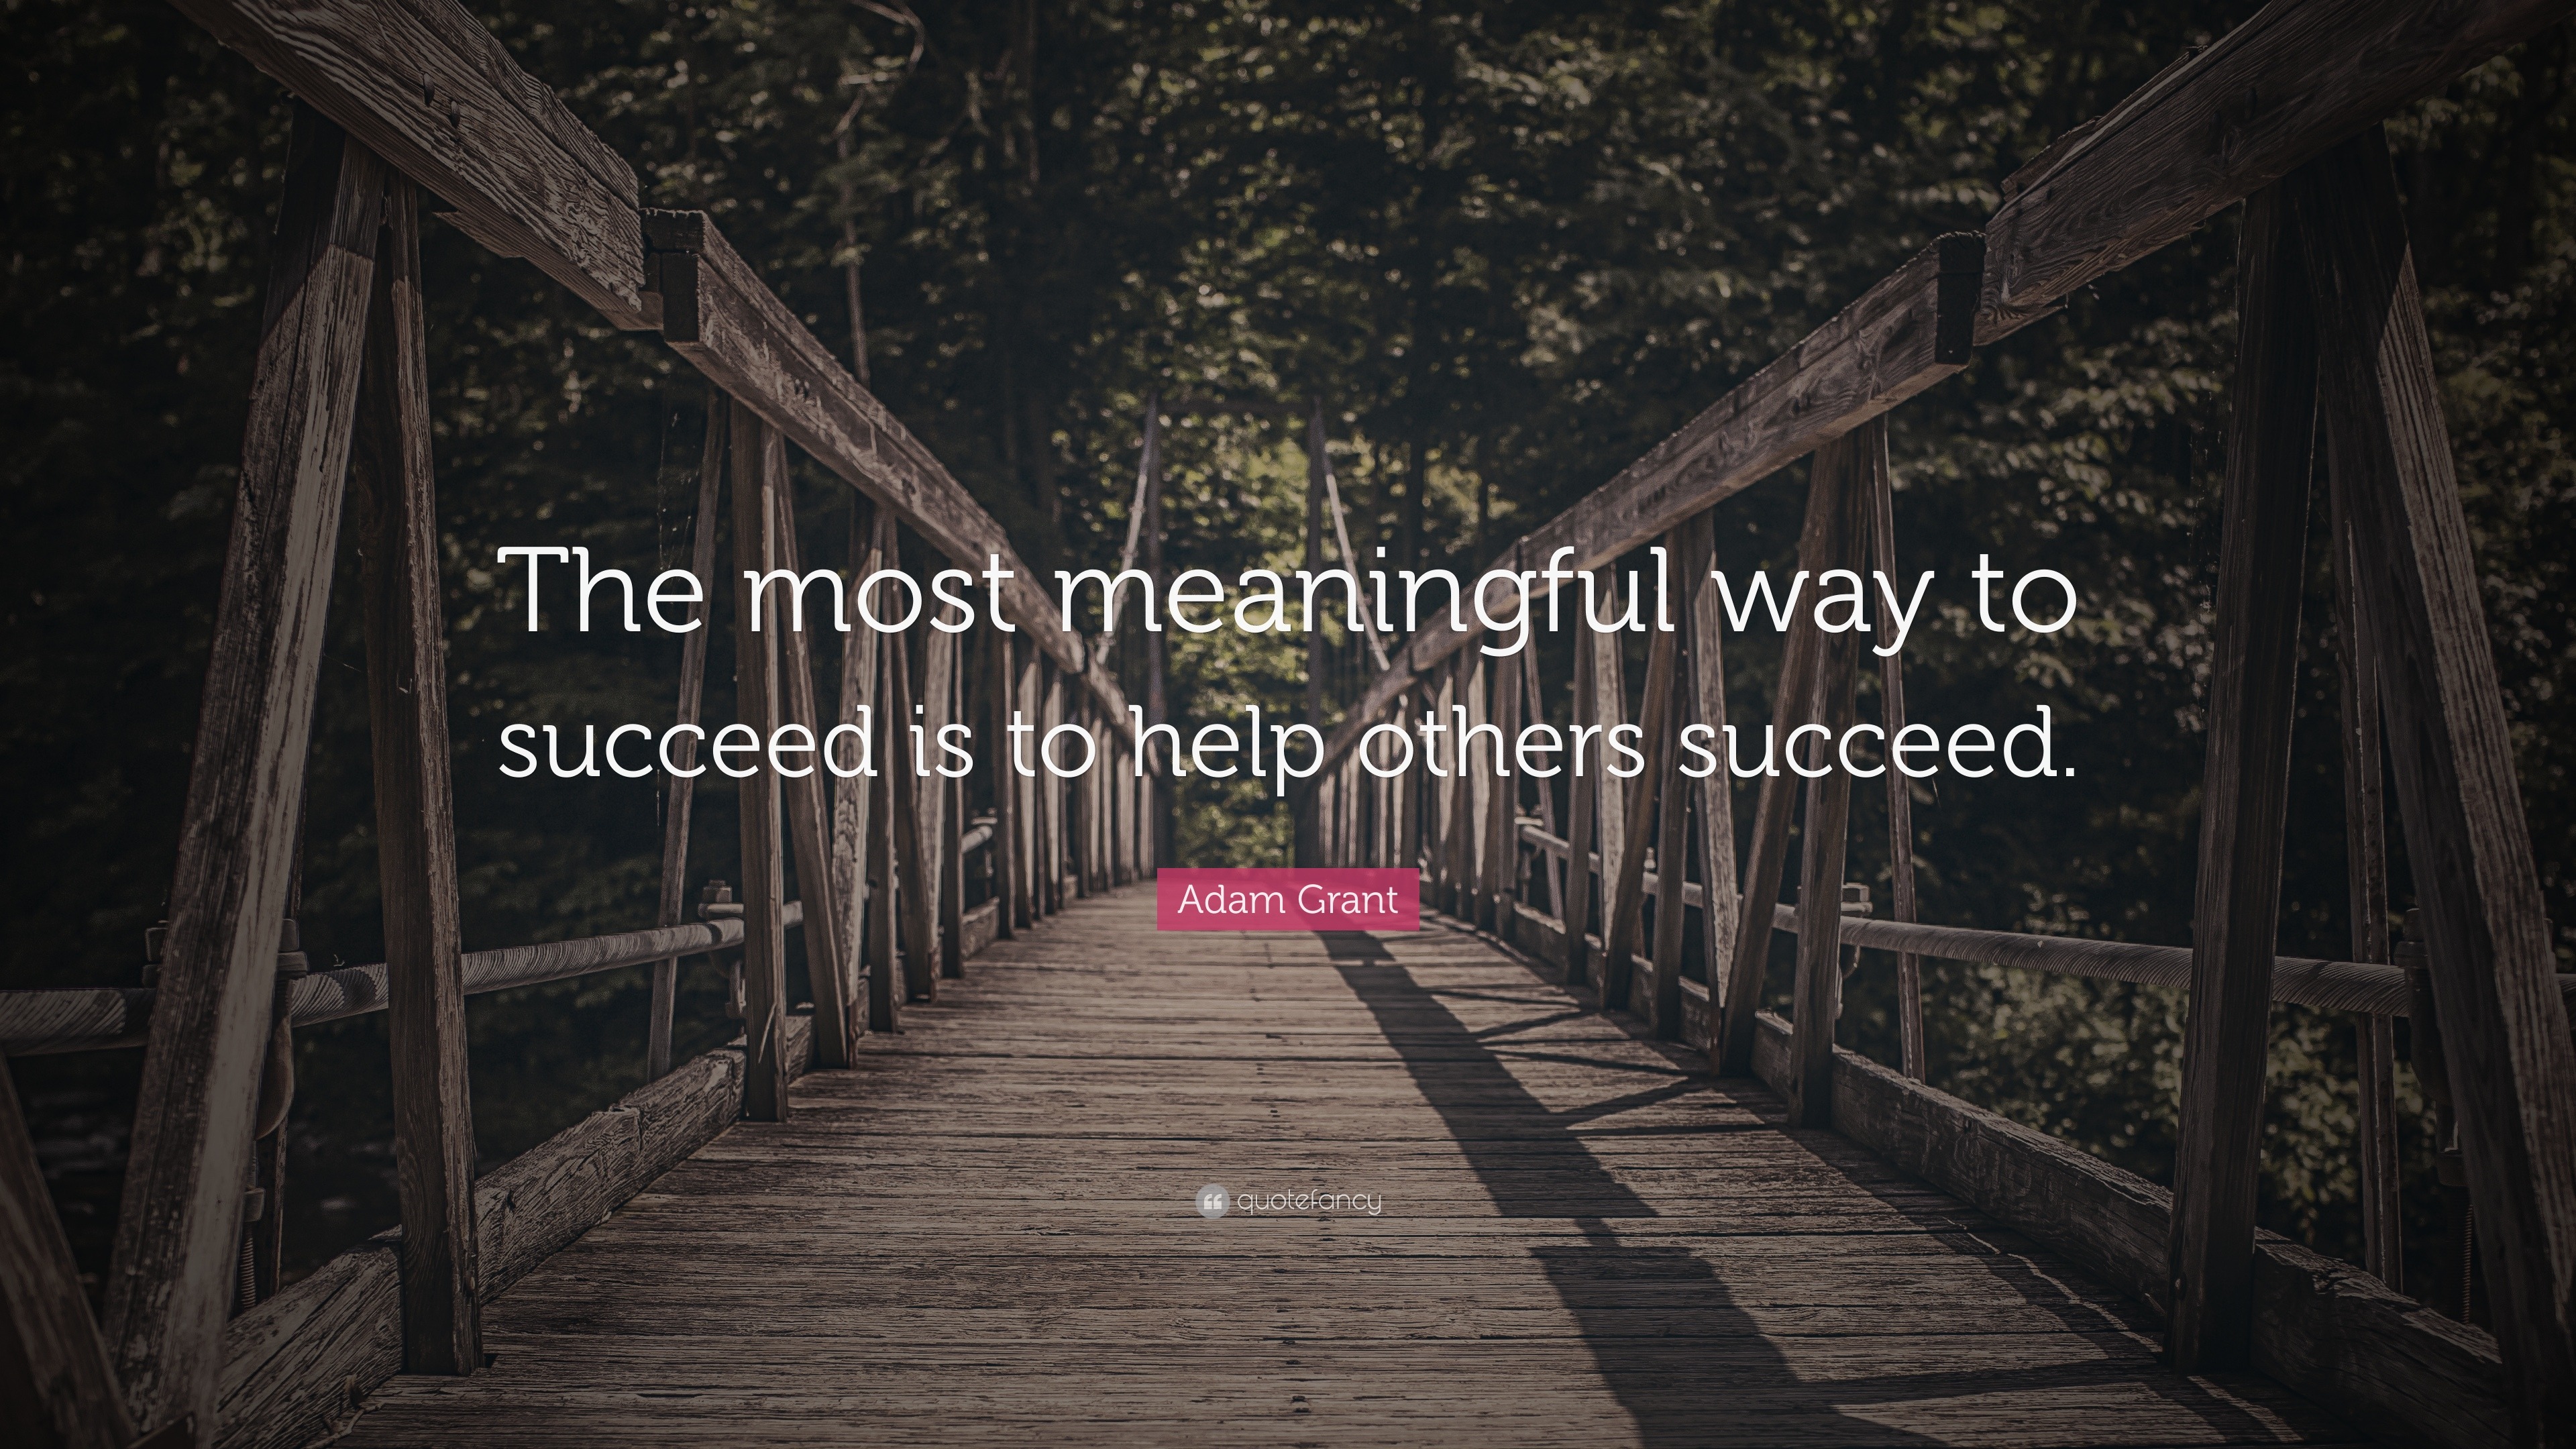 Adam Grant Quote: “The most meaningful way to succeed is to help others